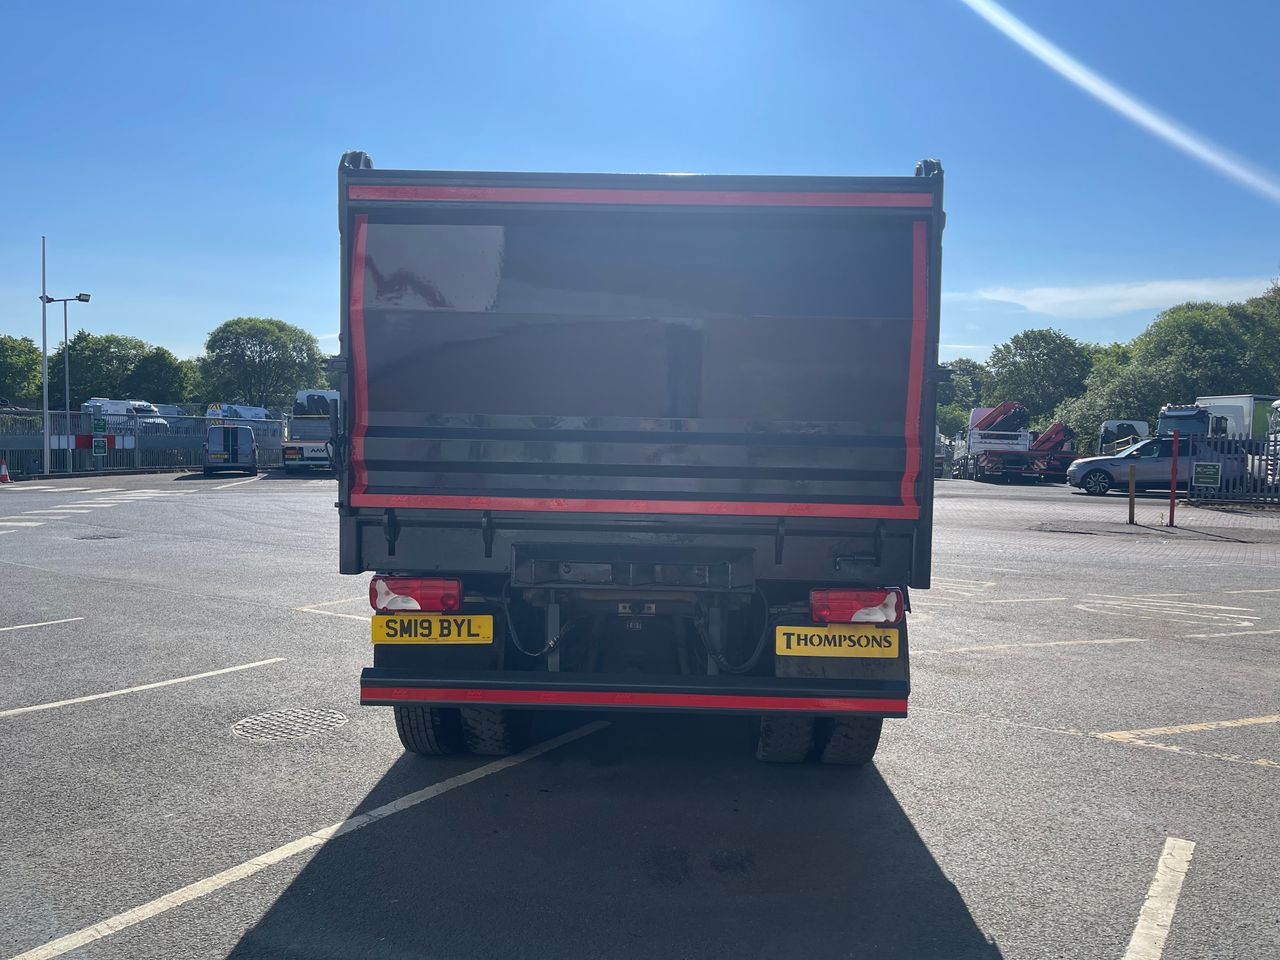 Ready to go Scania P410 XT, Tipper, 410, 32 Tonne, Day Cab, Automatic, Thompson Body with Easy Sheet, Beacons, High Ground Clearance, HYVA Ram, Air Tailgate, , -, - | for sale at MV Commercial, the UKs leading Truck, Trailers and Van supplier. (SM19BYL 348993)